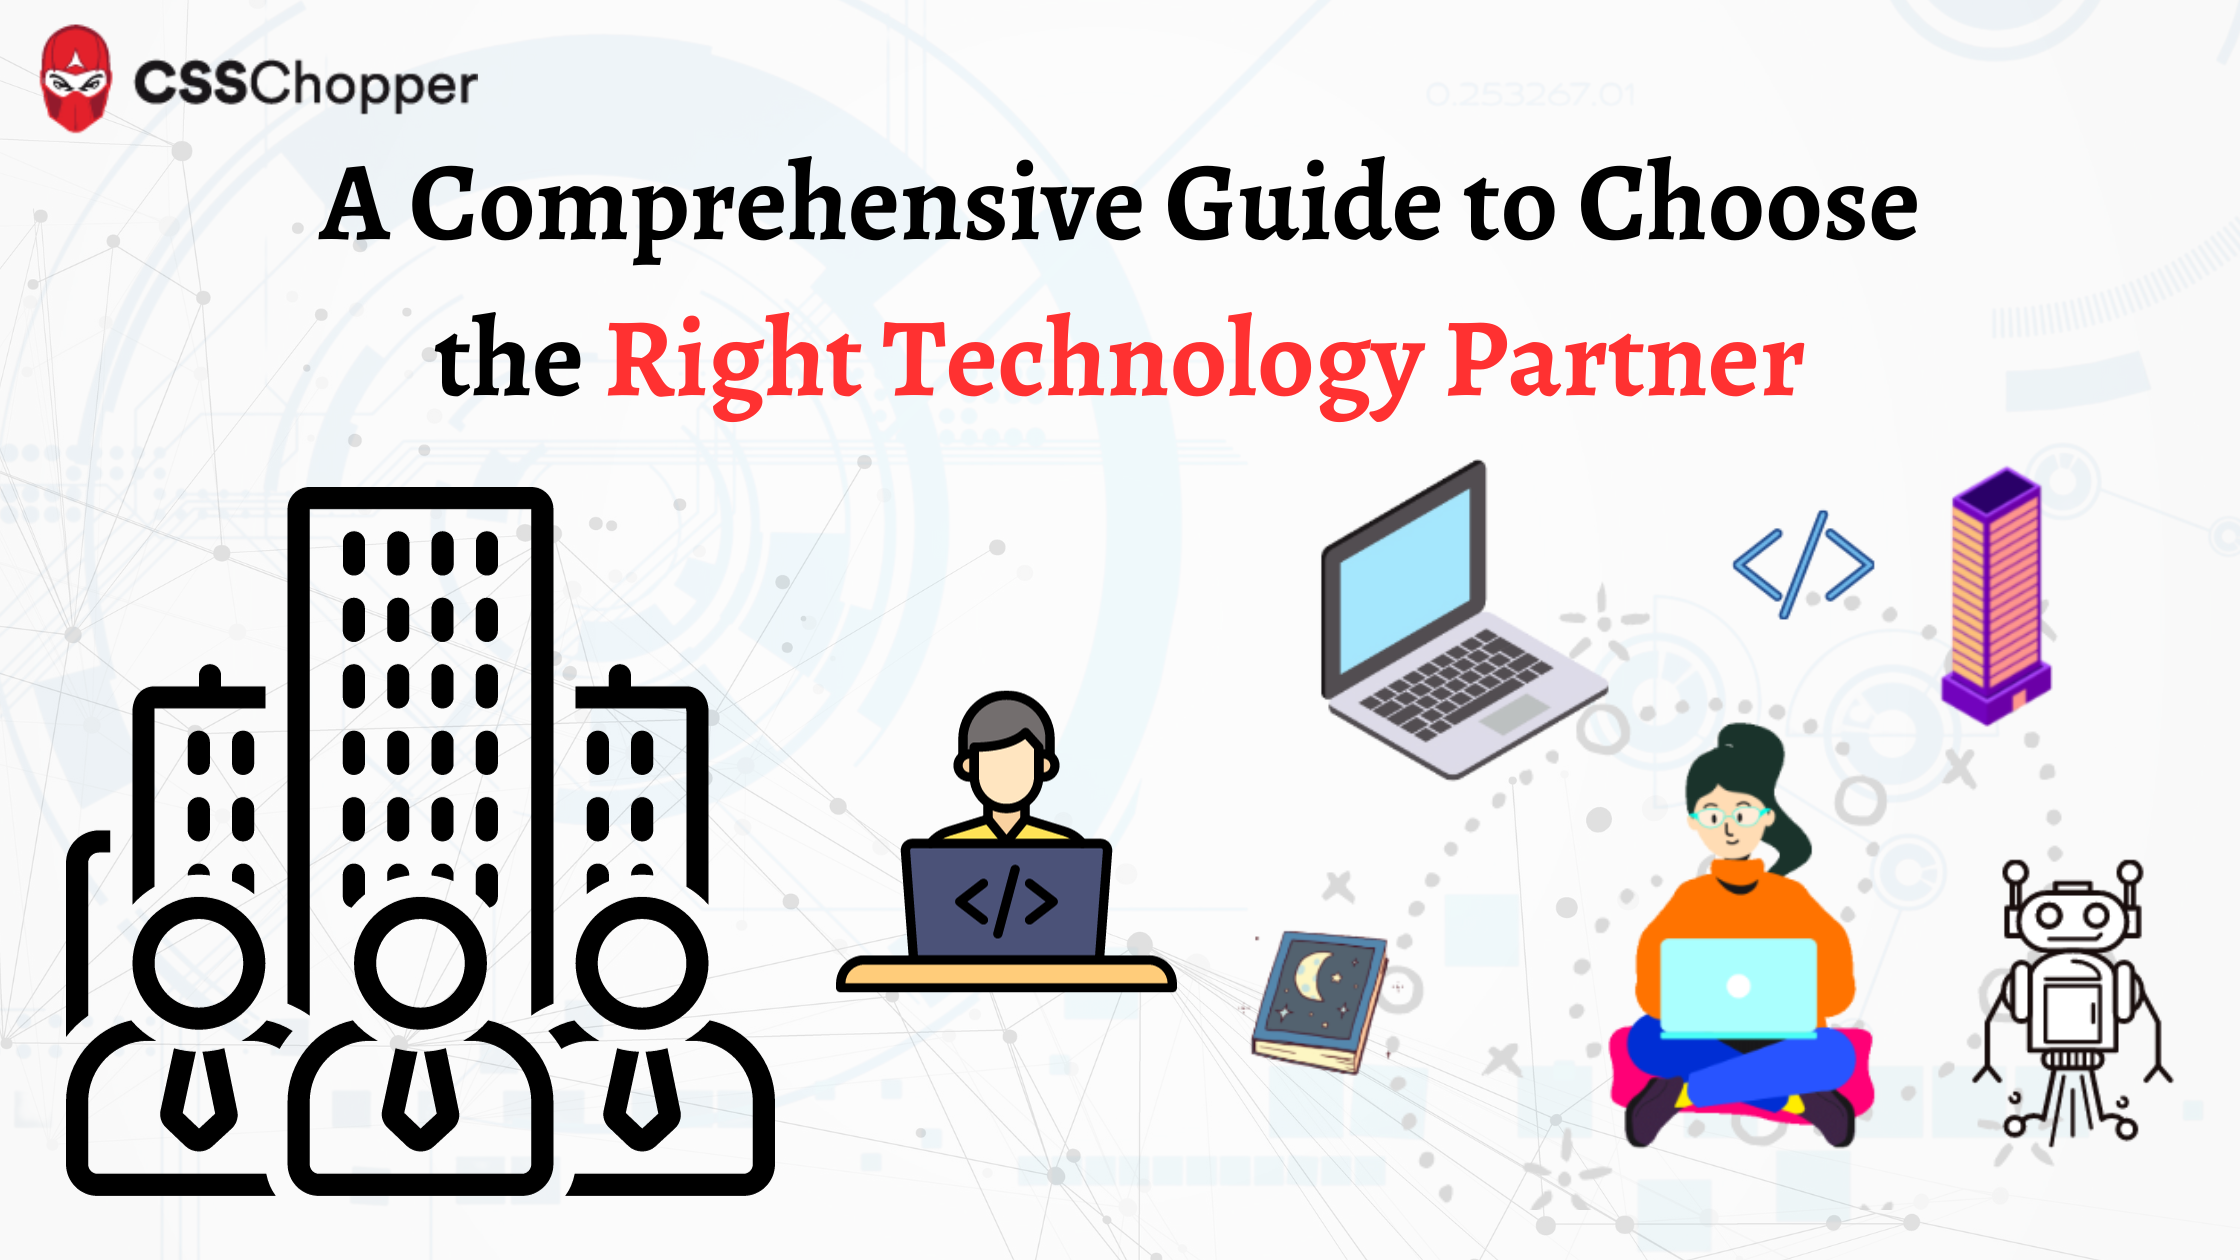 A Comprehensive Guide to Choose the Right Technology Partner